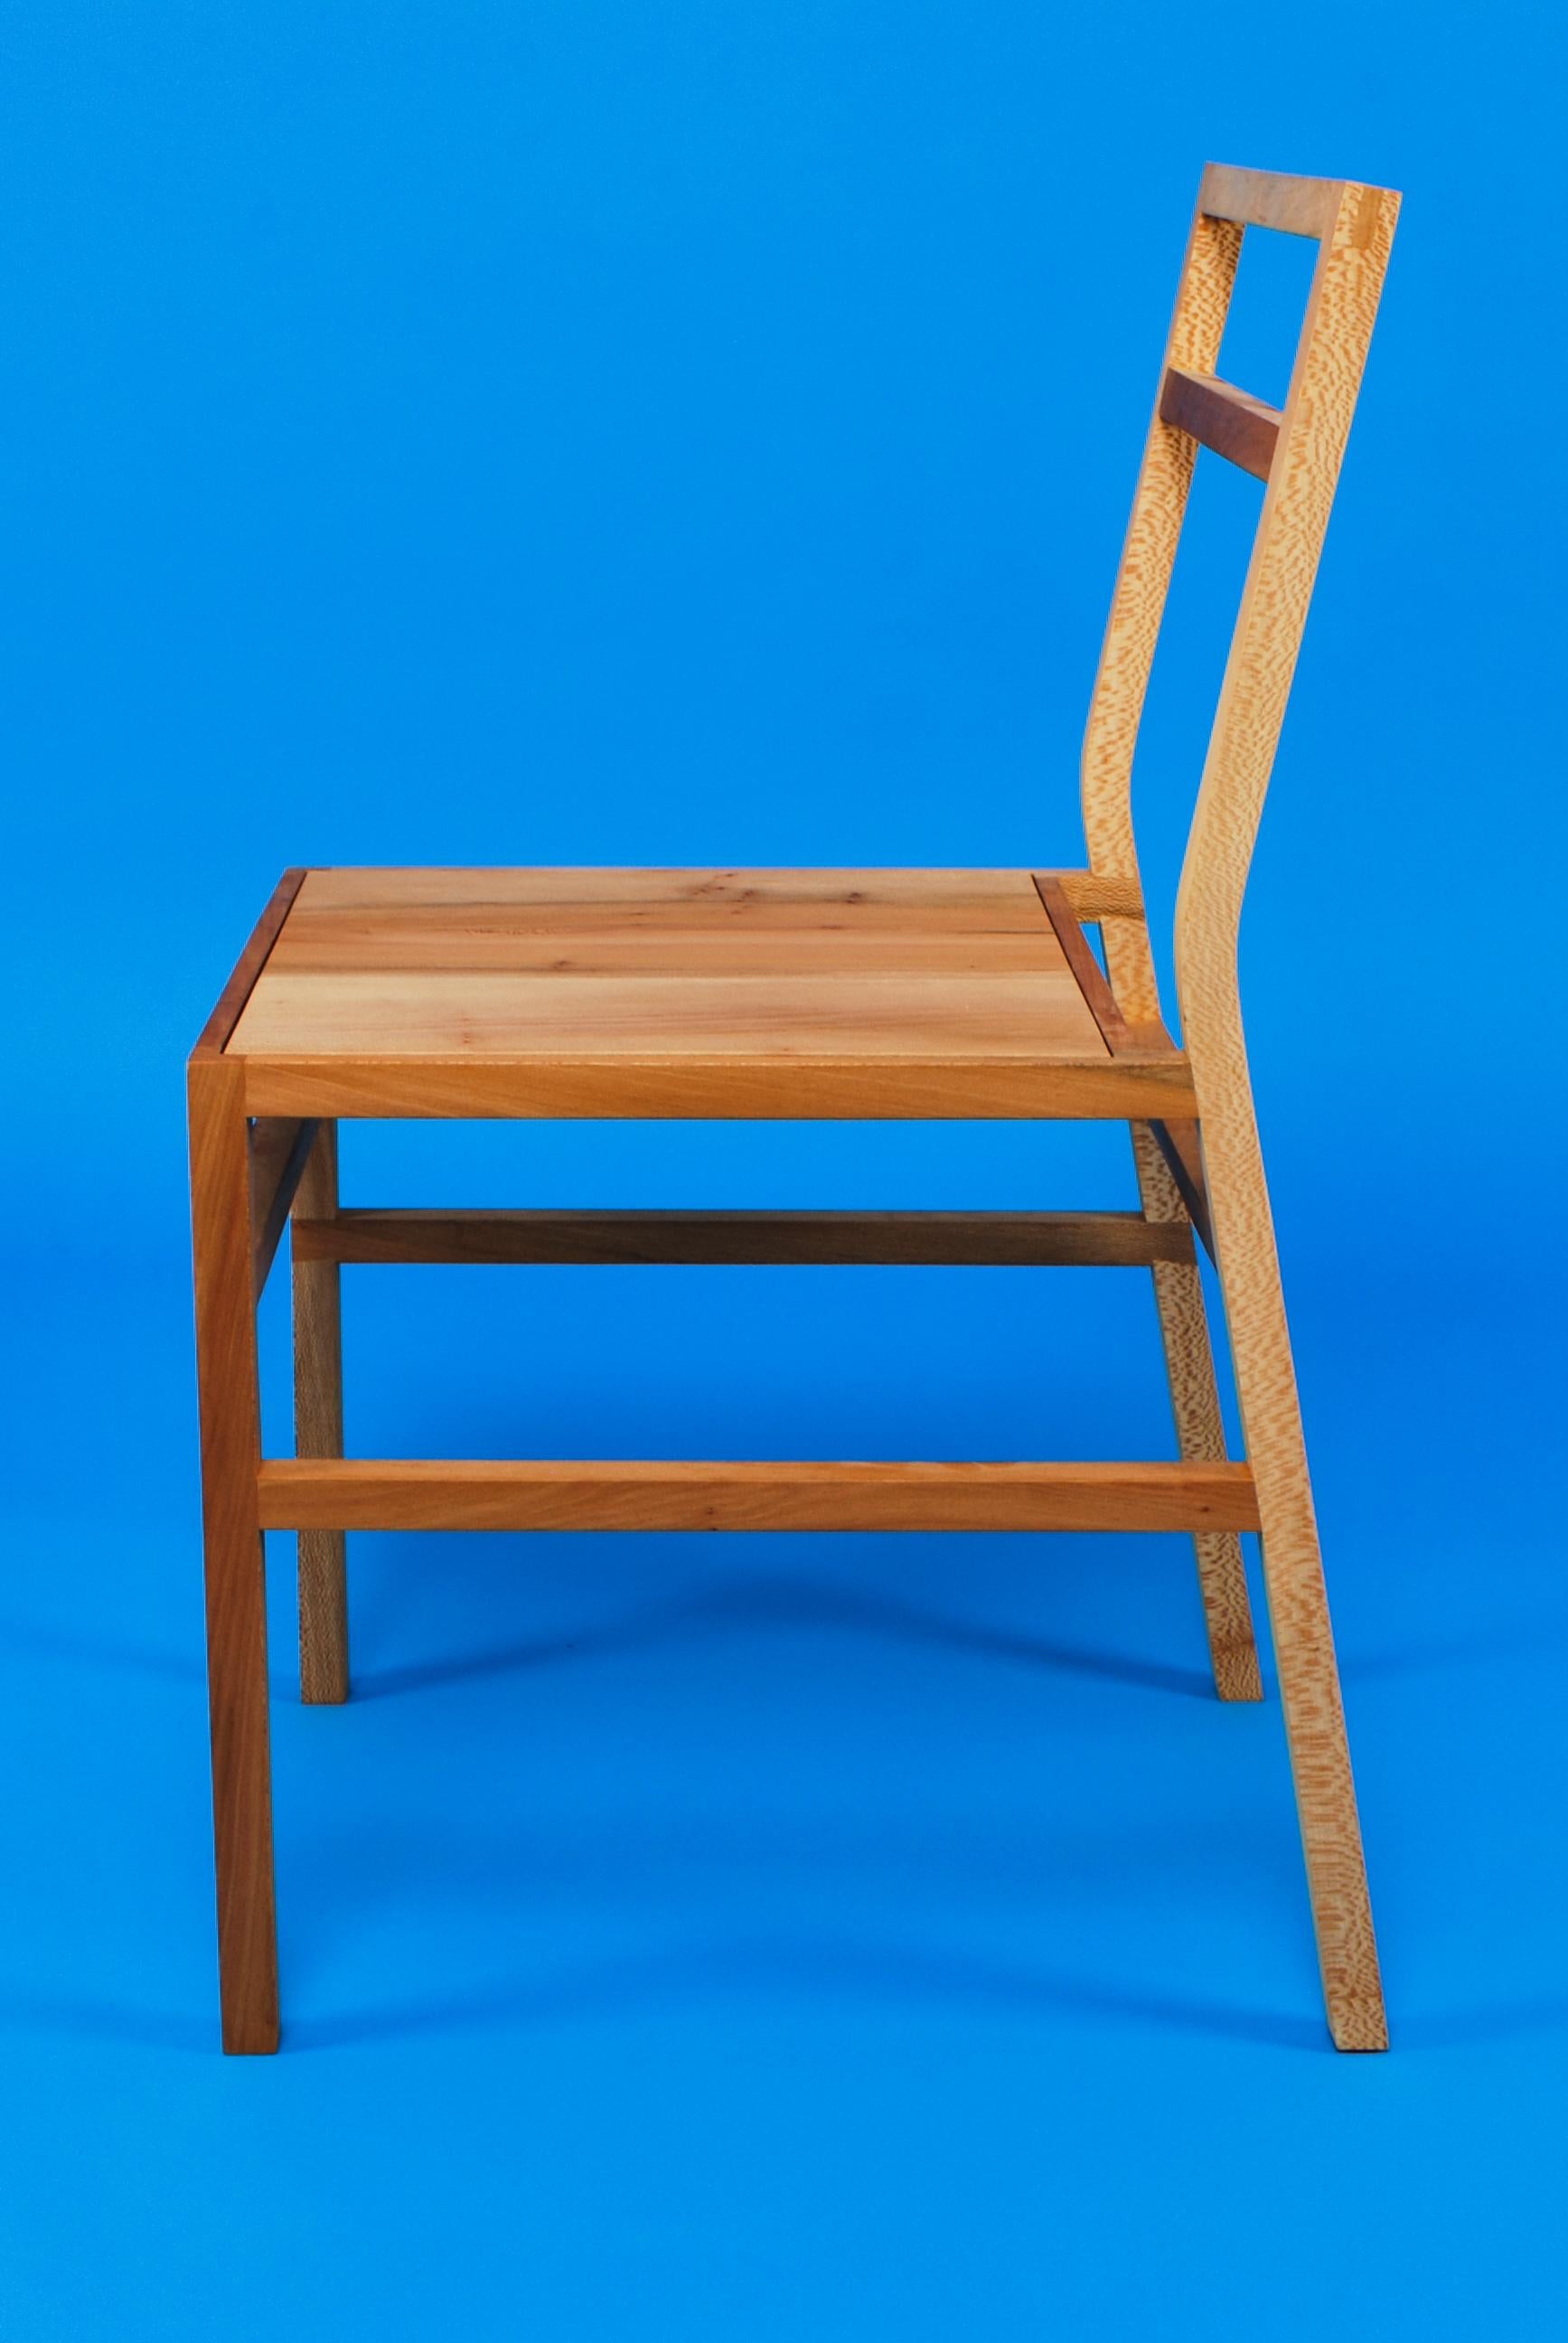 Britannique Organic Modernity Dining Chair, Solid Wood, London Plane, Handmade by Loose Fit, UK en vente